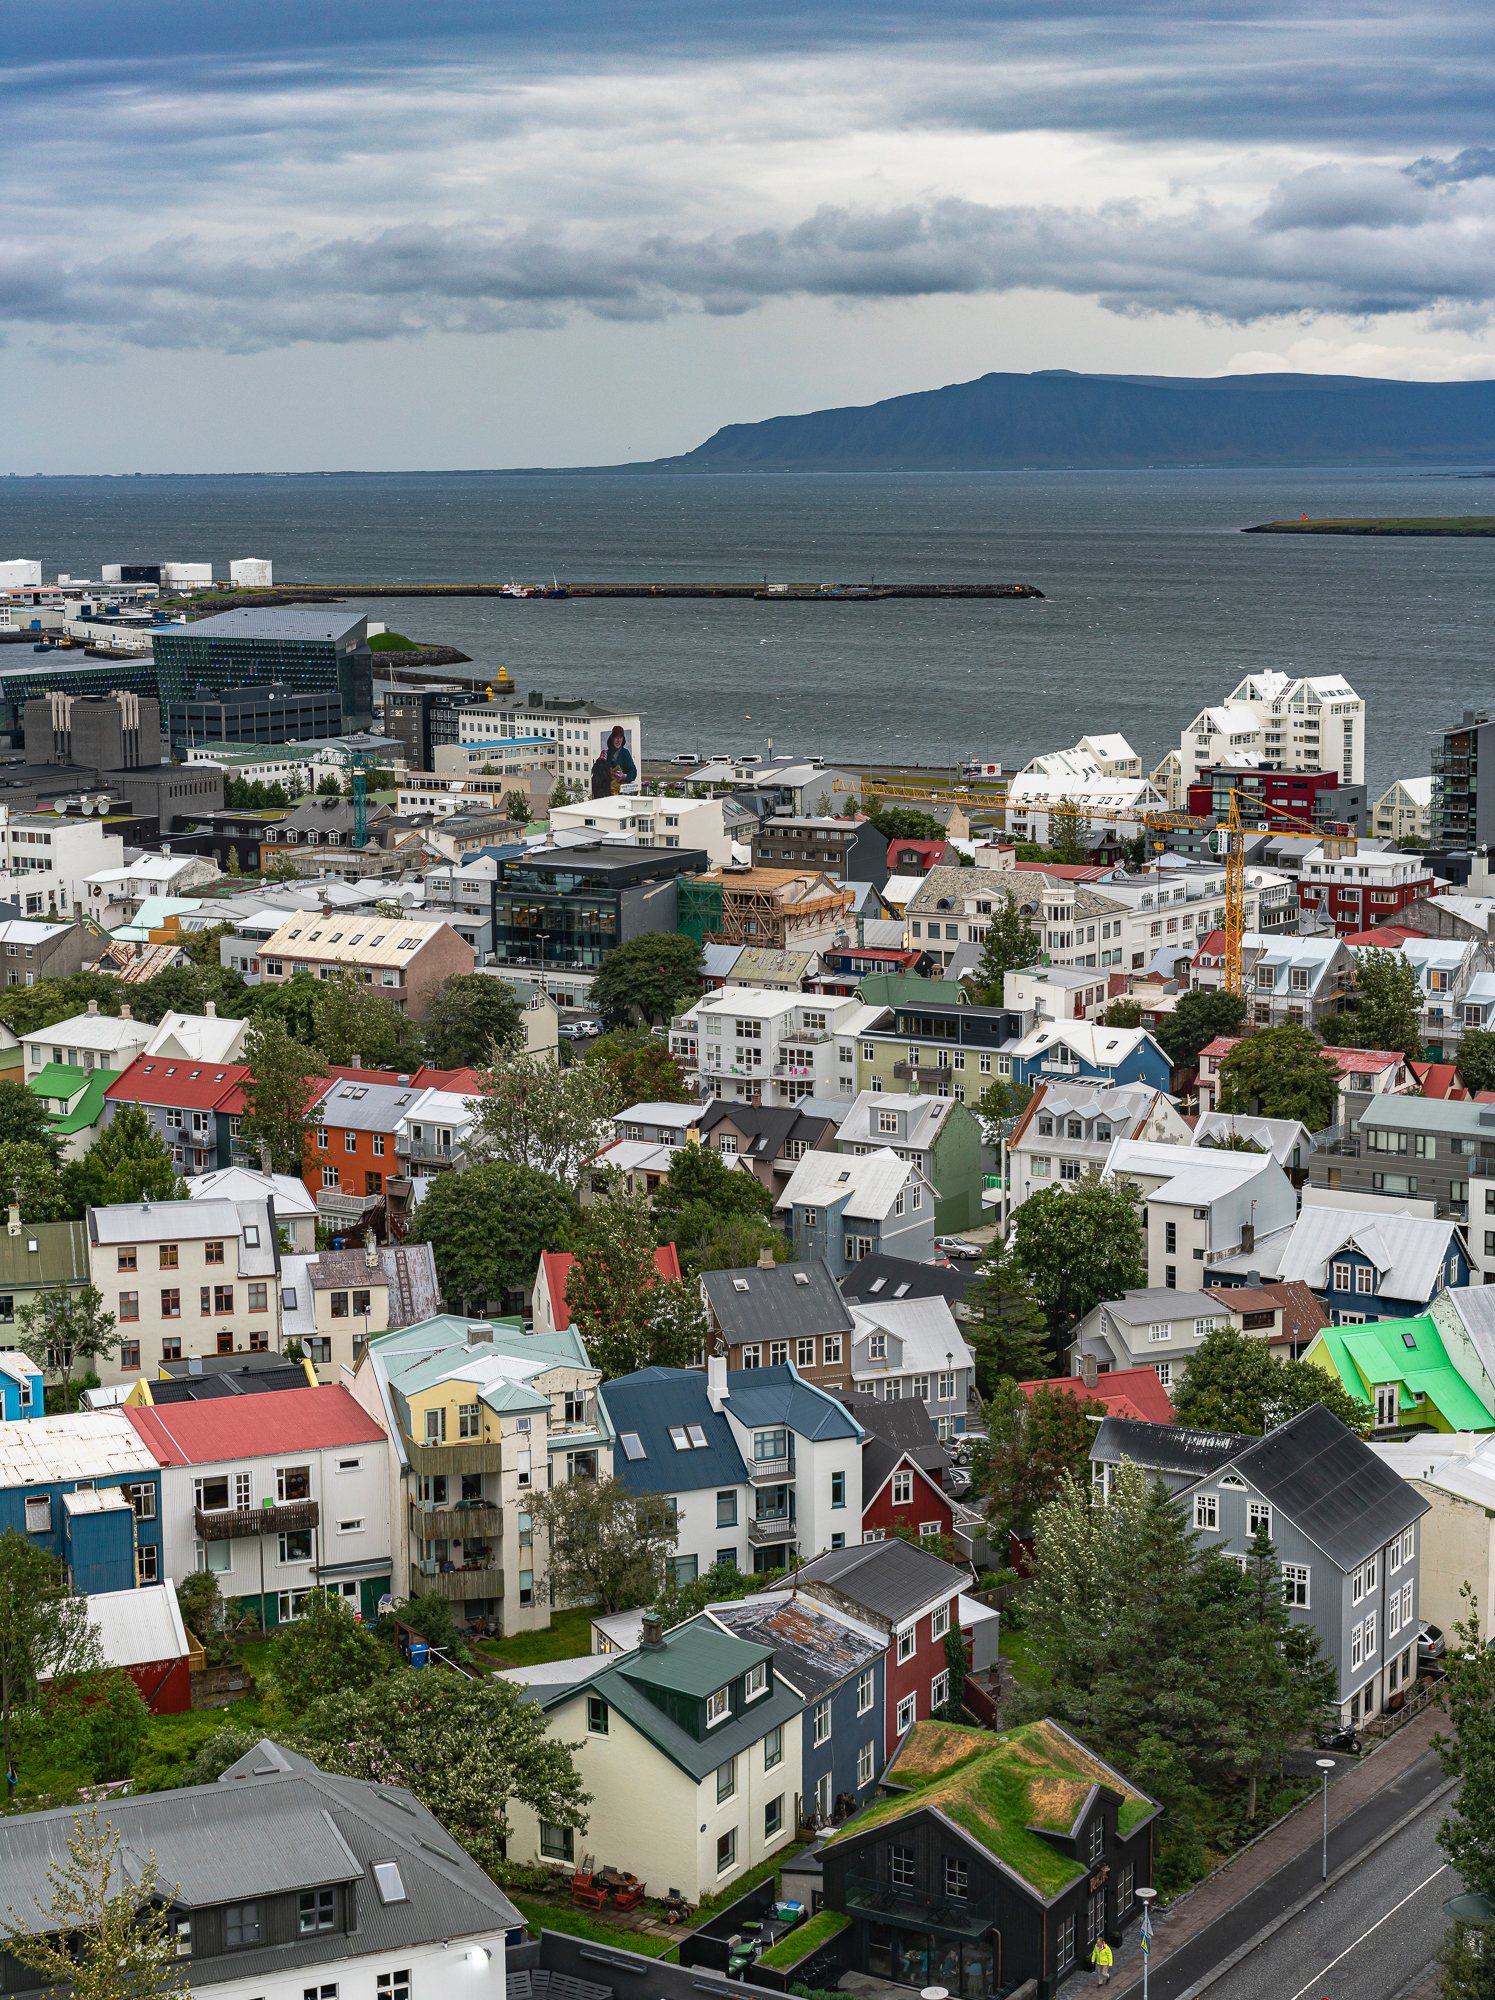 A View of Reykjavik, Iceland with Harbor & Mountains beyond